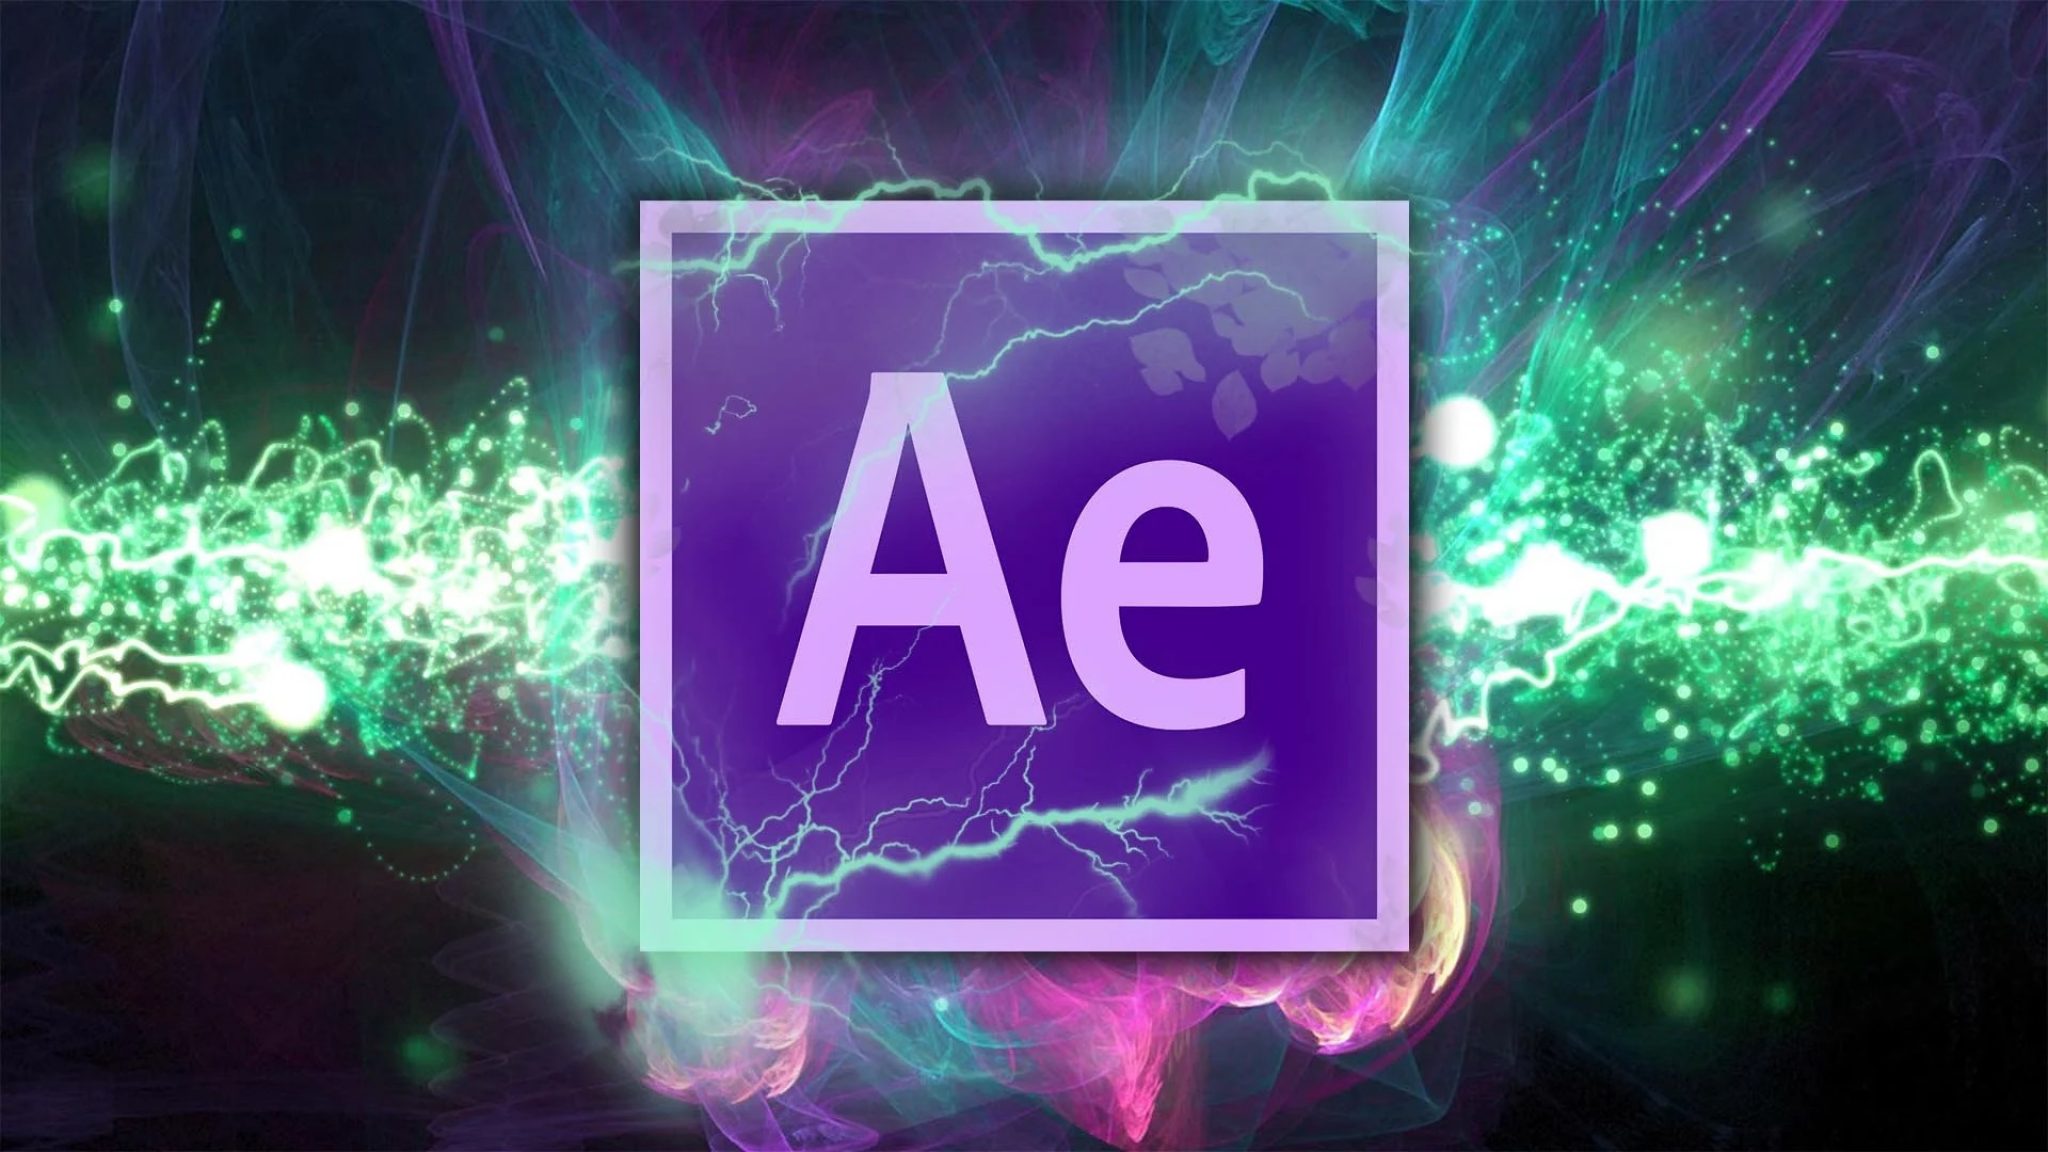 Сайт effect. After Effects. Adobe after Effects. Adobe after Effects cc. Адоб Афтер эффект.